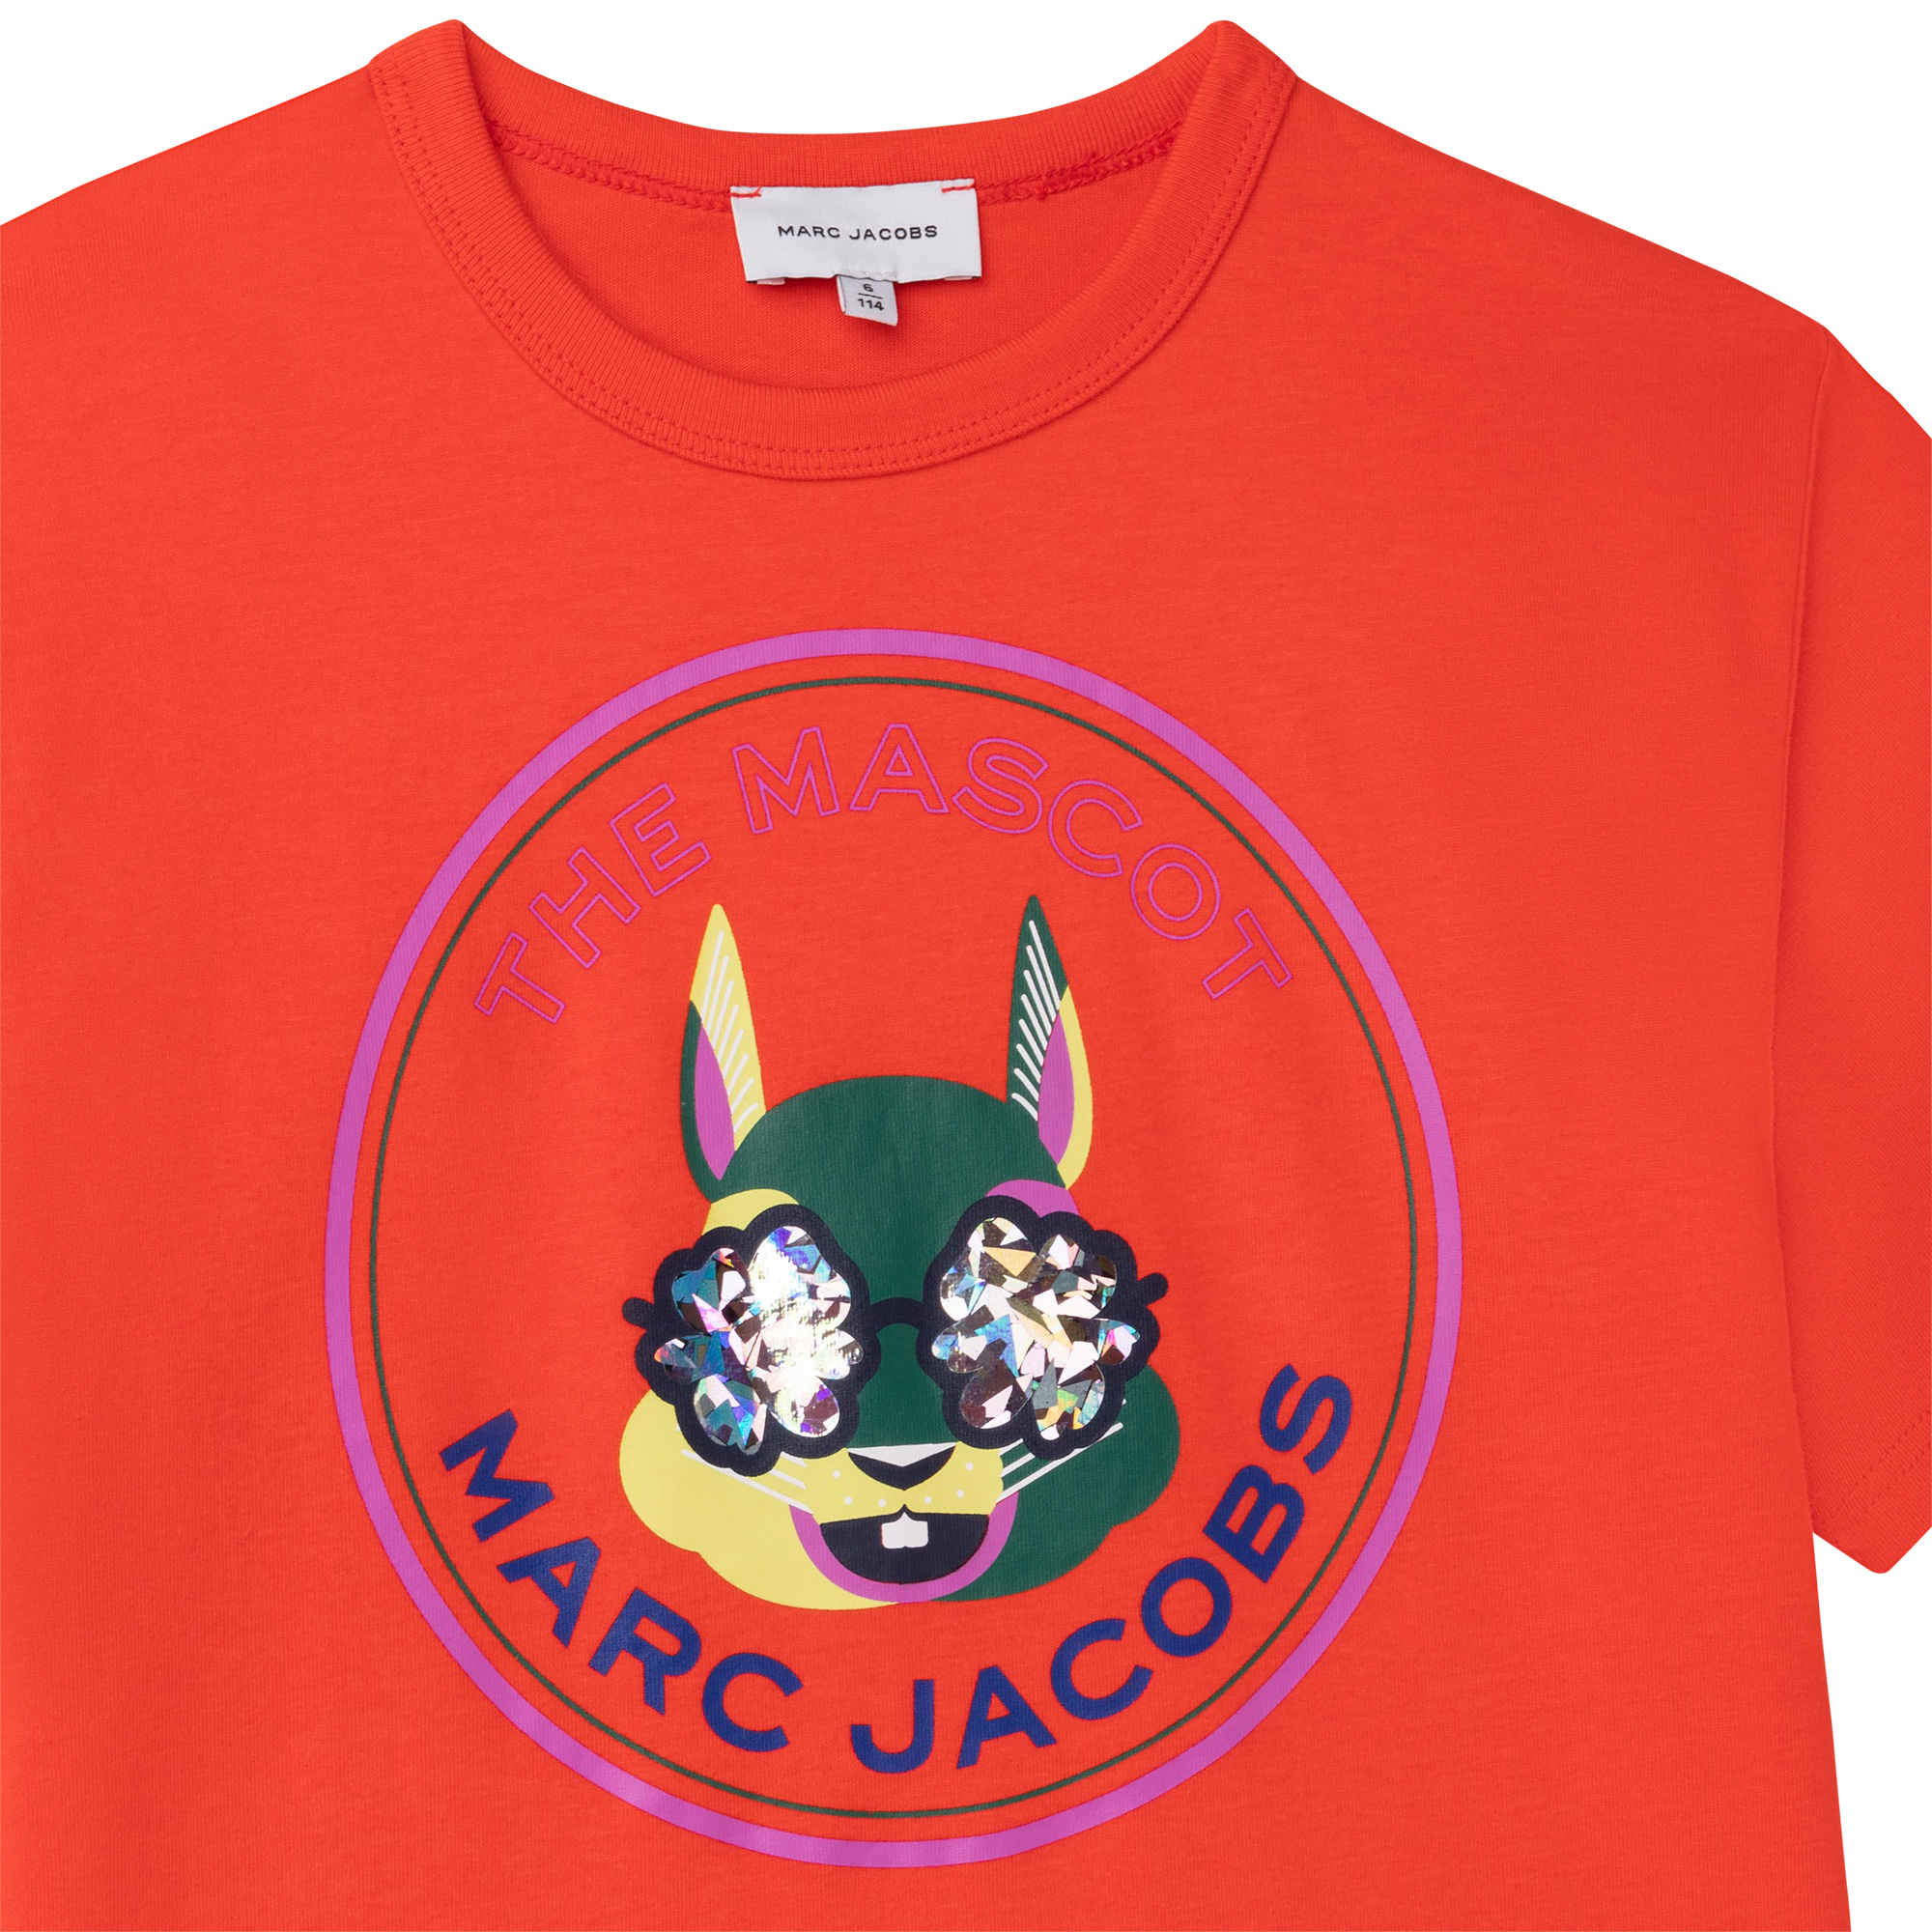 "The Mascot" Print Short Sleeve MARC JACOBS for GIRL